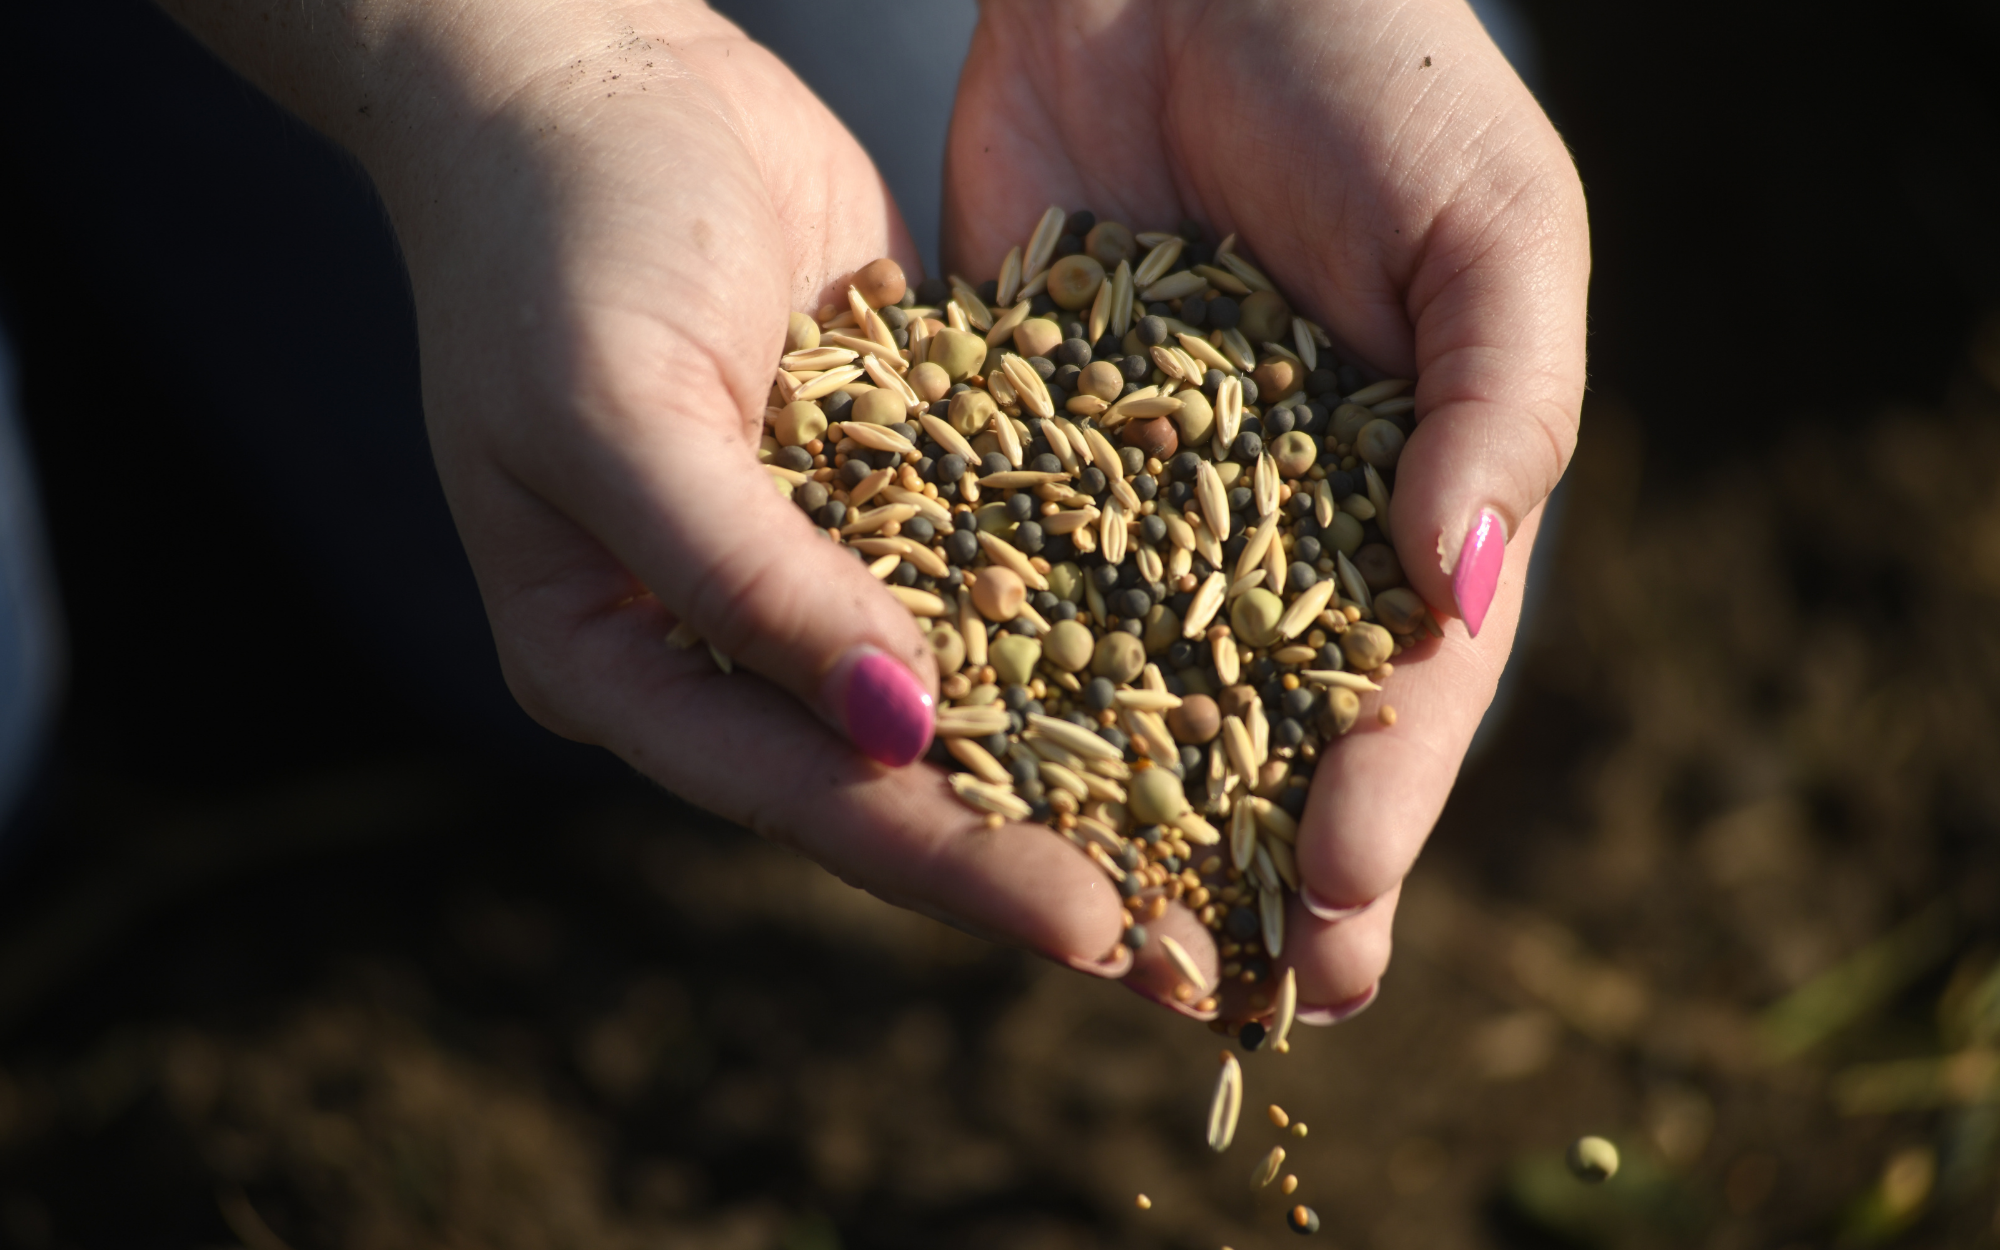 Seeds shown in hands that are safe for you and your family